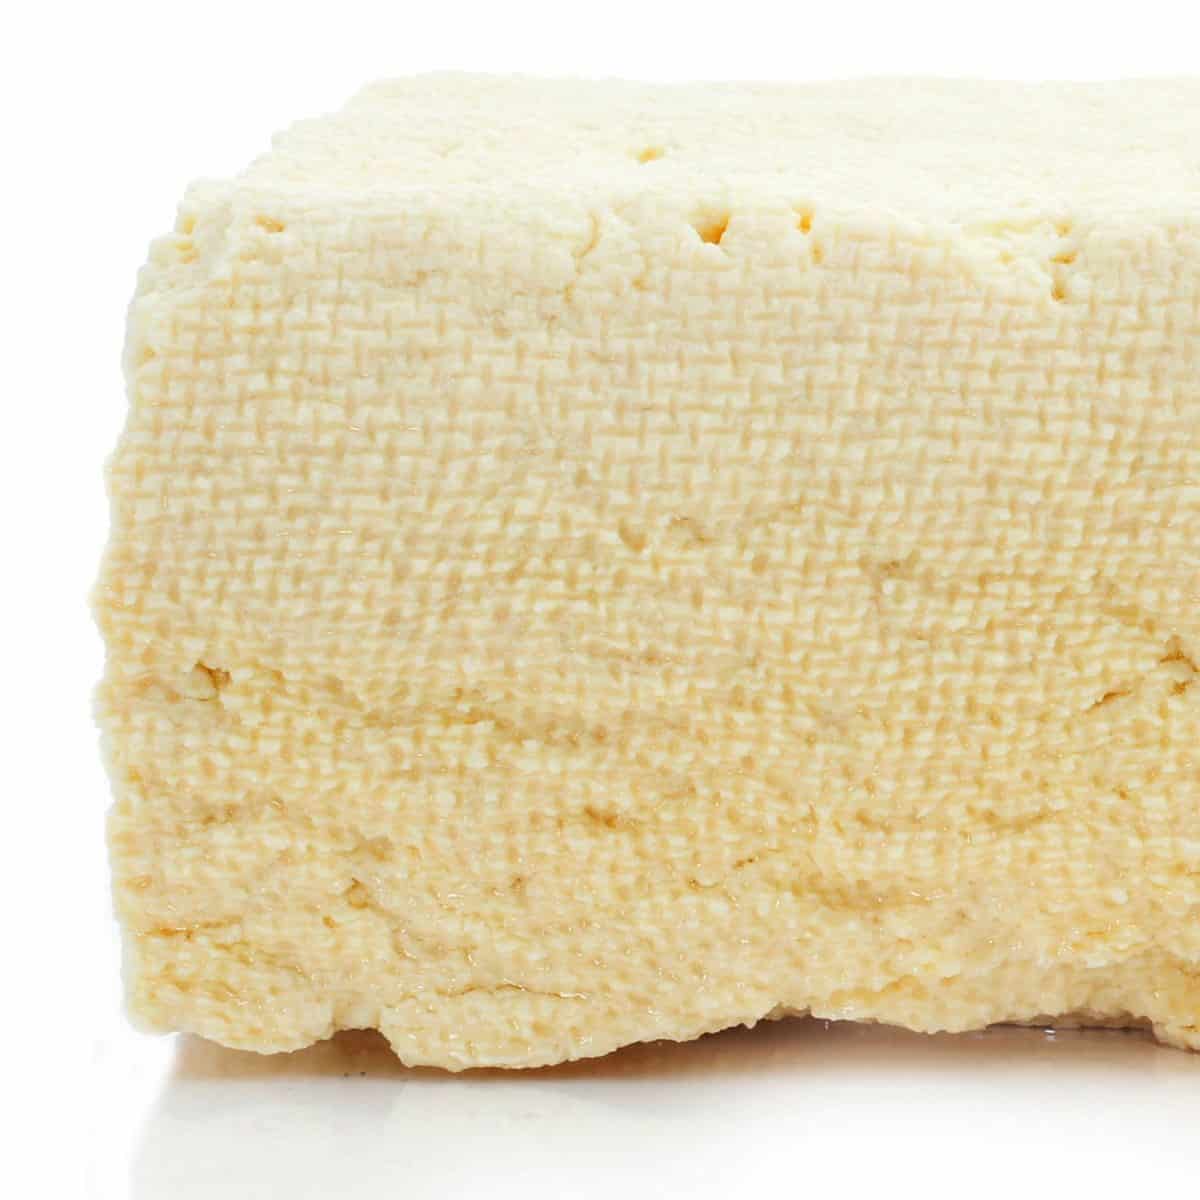 A block of super-firm tofu, one of the common types of tofu, on a white countertop.